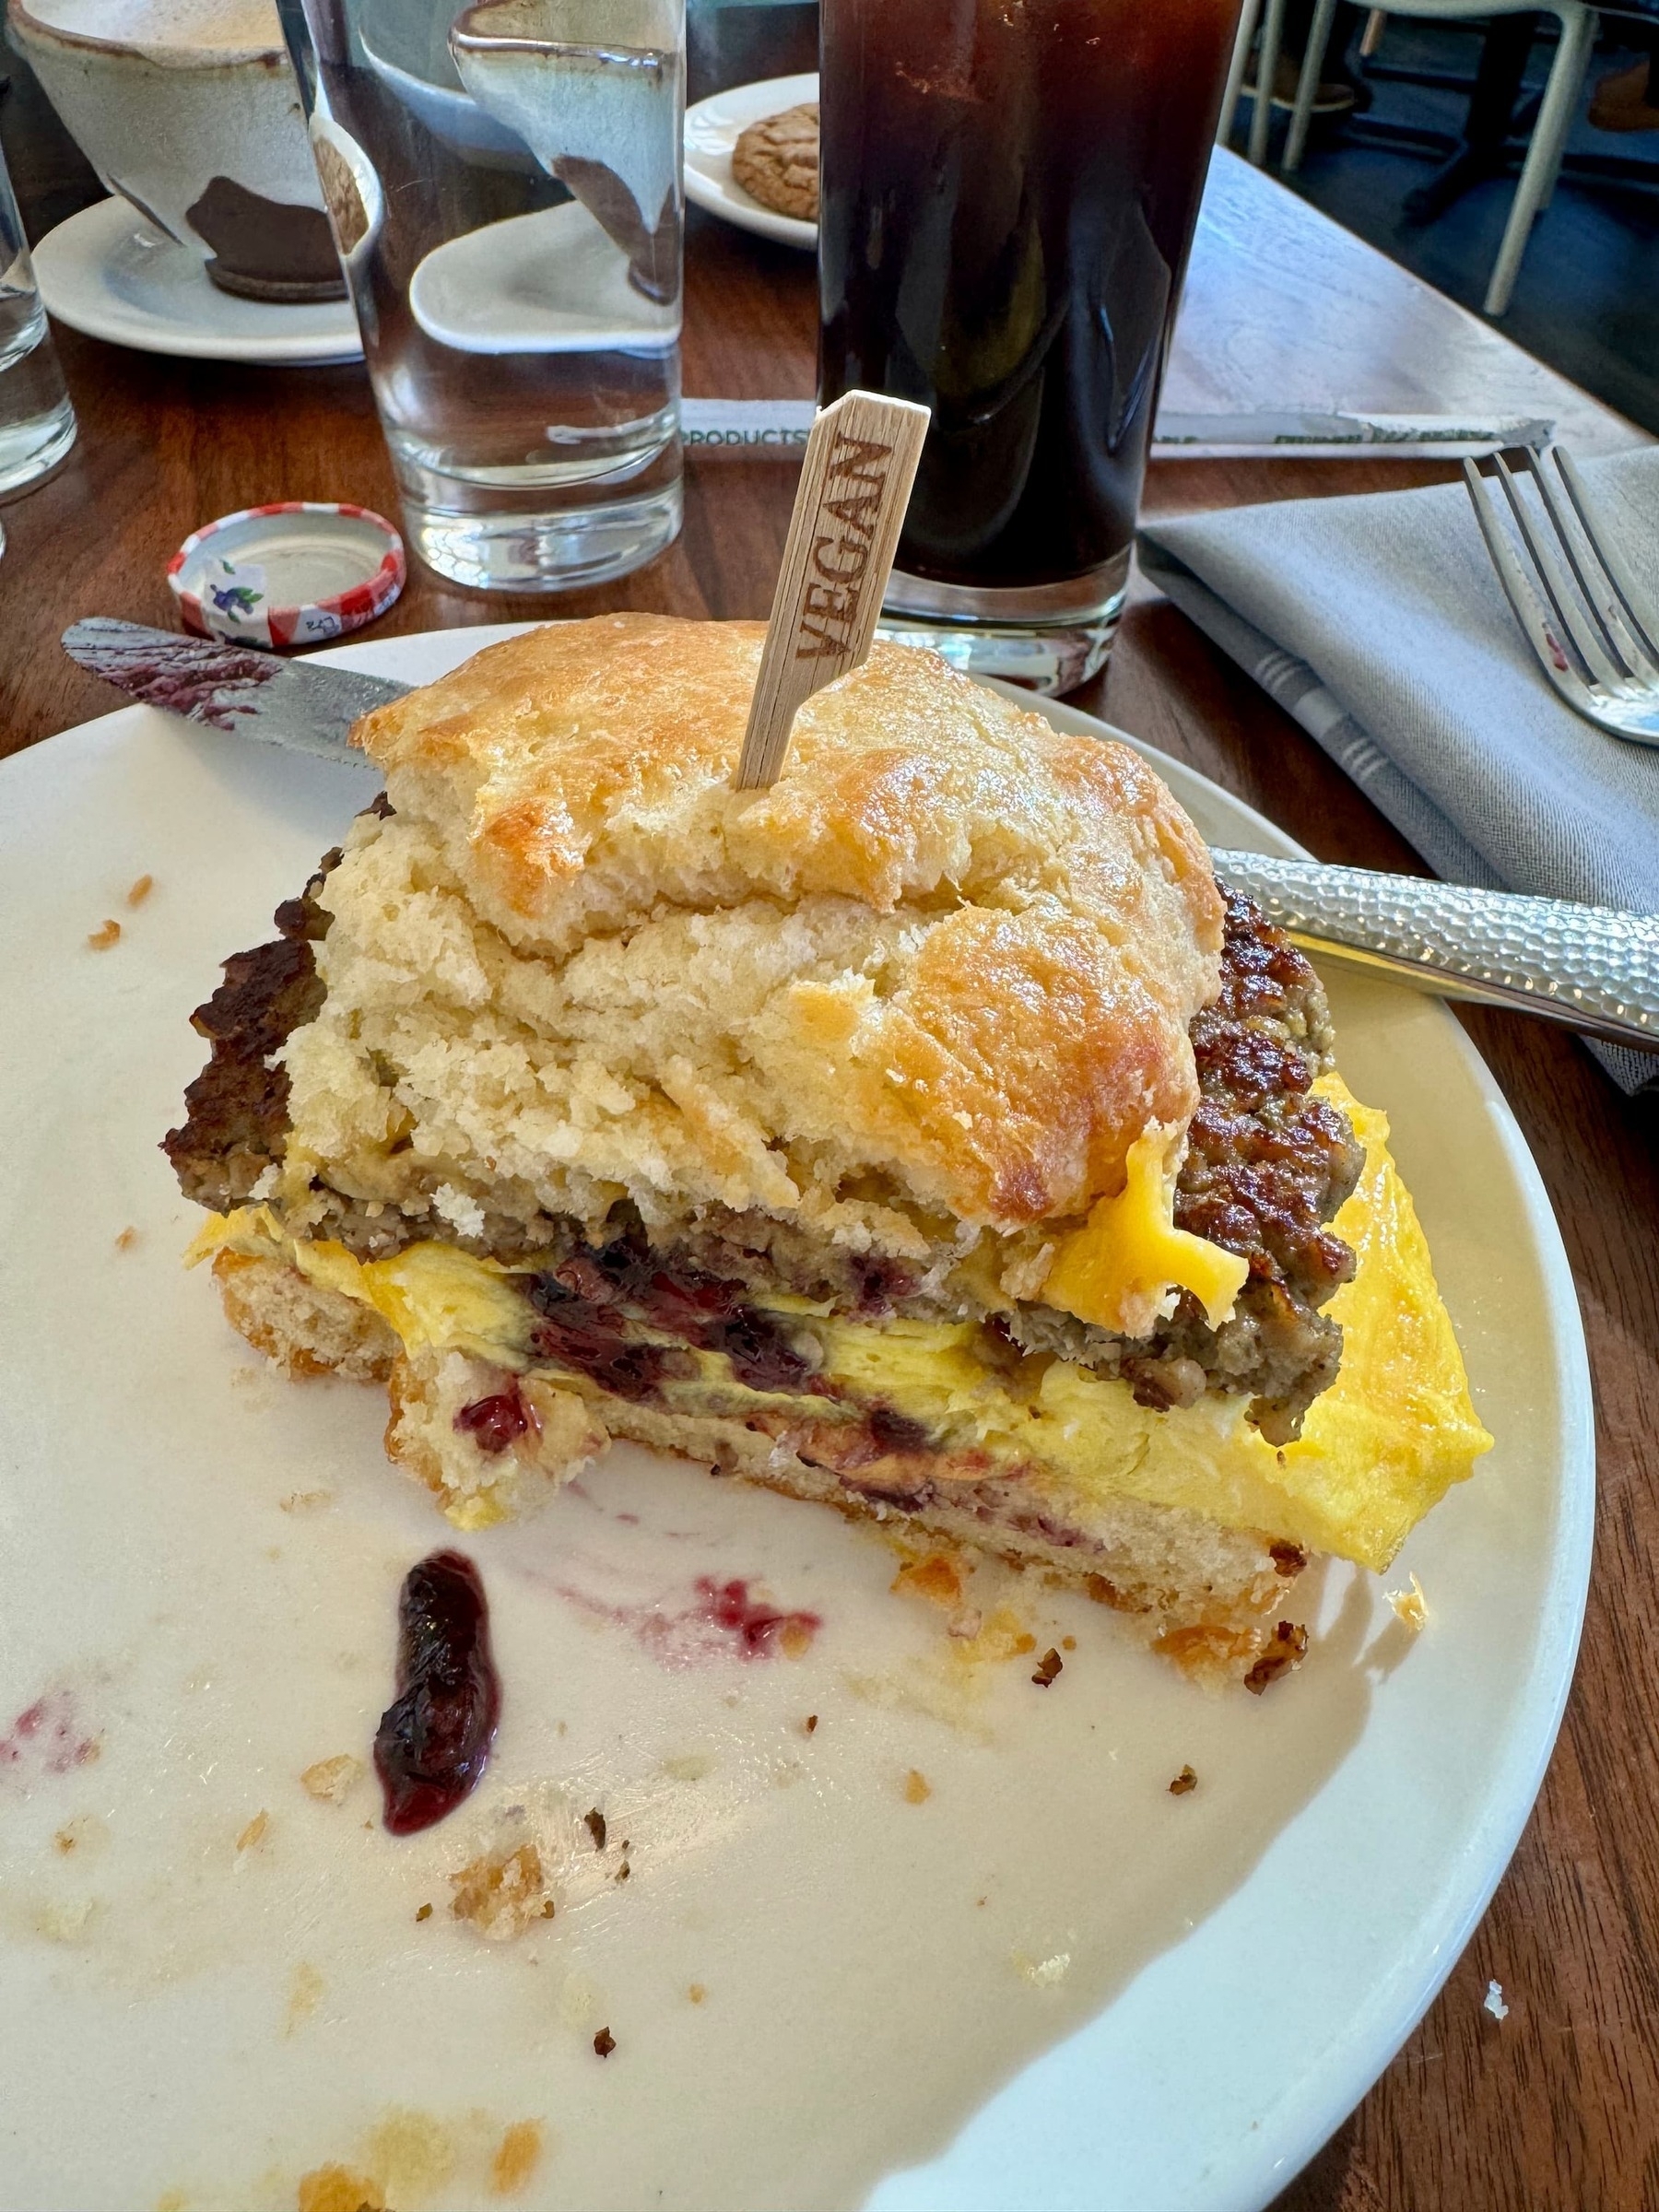 Breakfast sandwich (veggie burger, eggs, and cheese on a biscuit with a little bit of purple colored jam) with a wooden toothpick through the middle, the word 'Vegan' on it, on a plate. In the background is a glass of water and a glass of iced coffee.